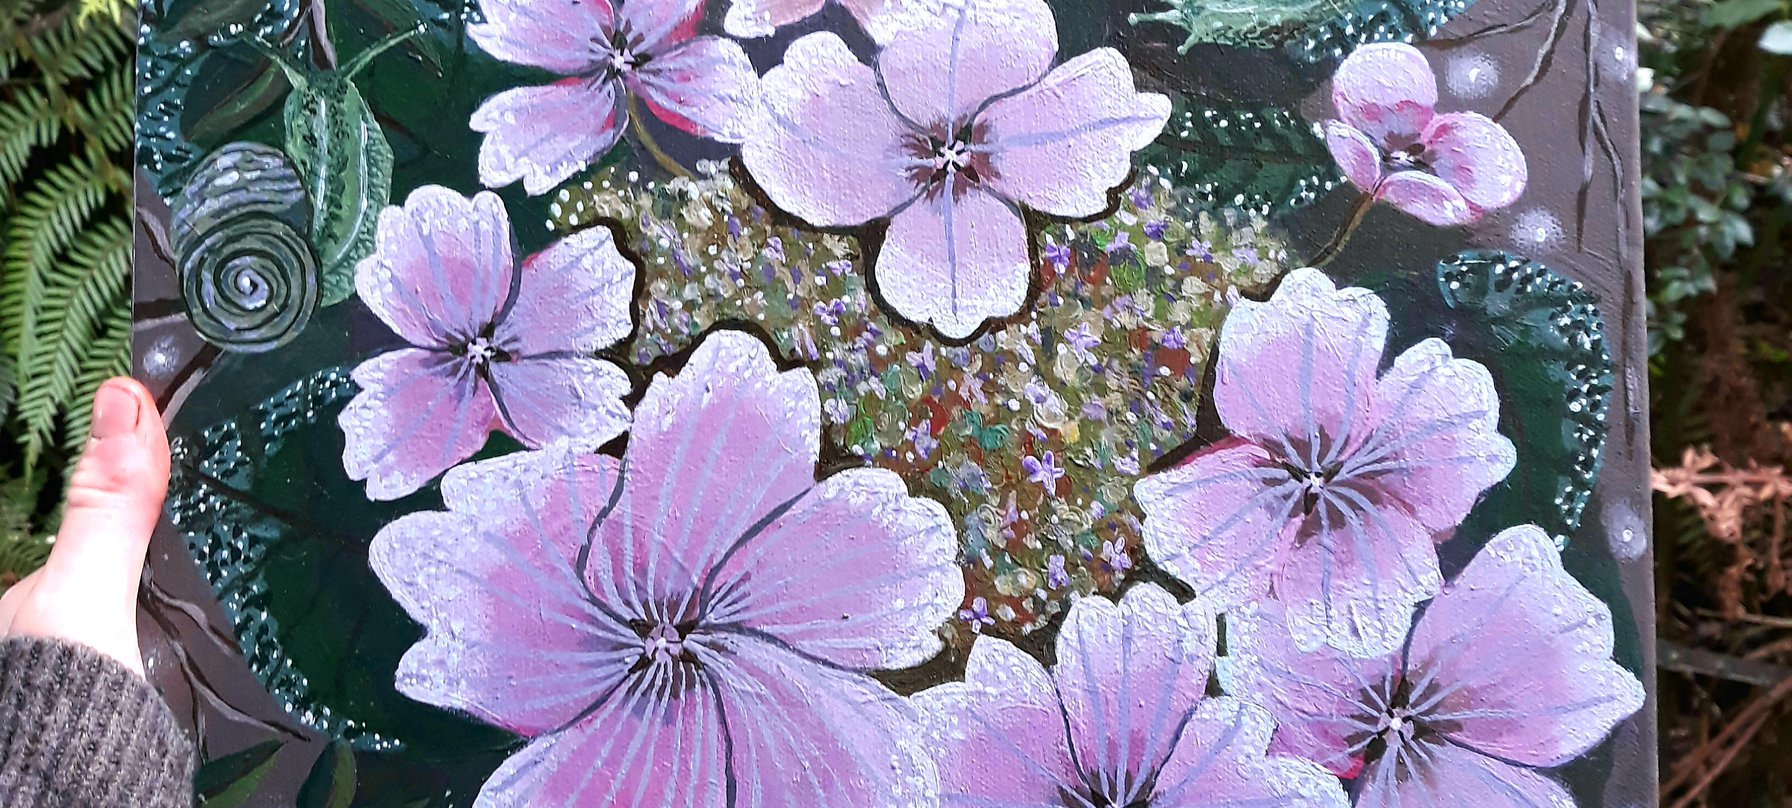 A photo of Tahlia's artwork. The artwork is painted onto a square canvas and features a swirl of purple, pink and white flowers. Surrounding the flowers is a bed of green leaves, branches and curious snails. Credit Tahlia.